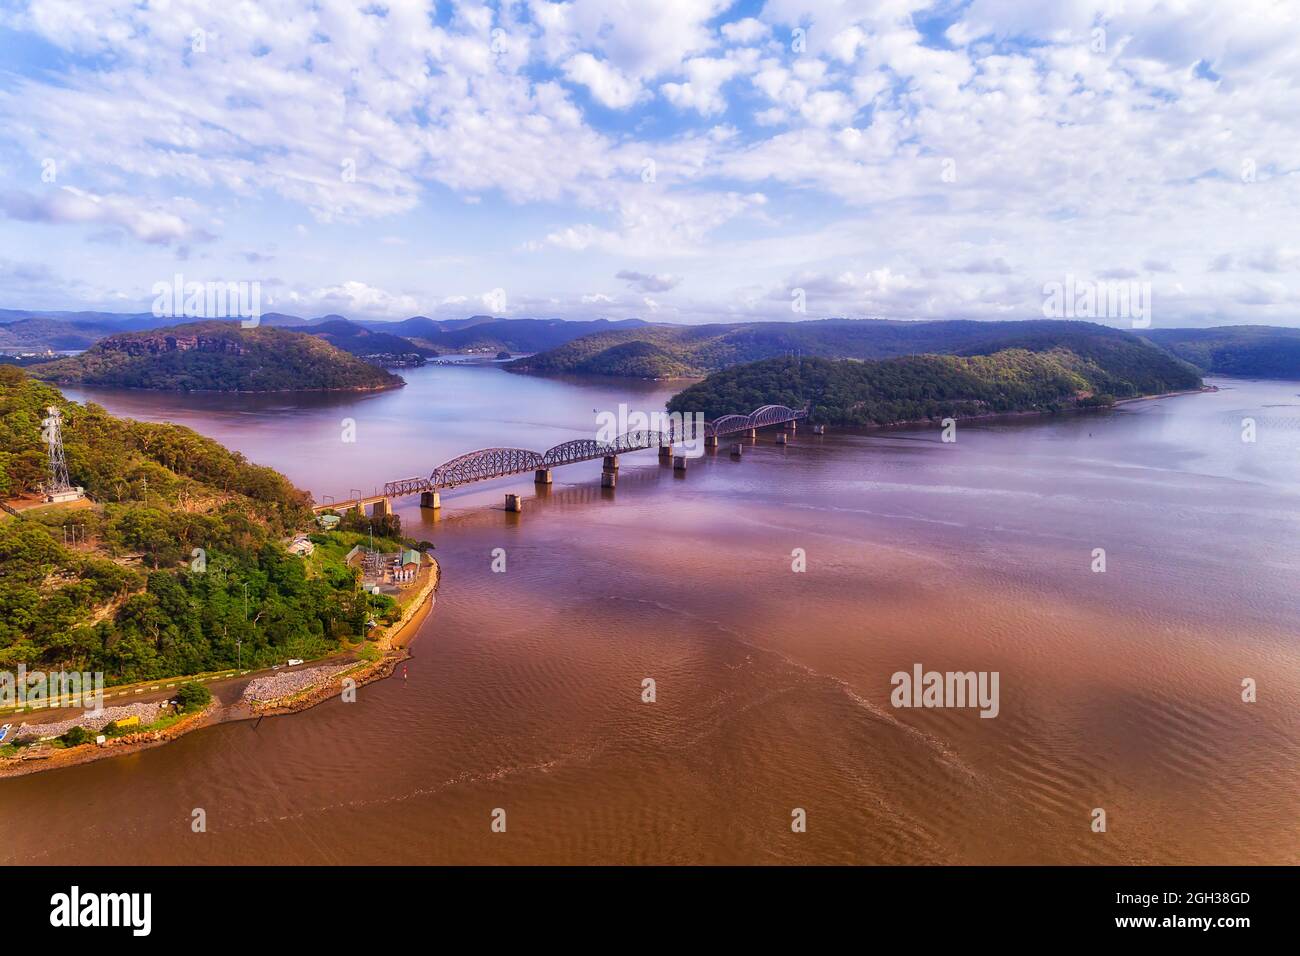 Hawkesbury river of Greater Sydney to the Central coast with railway bridge - aerial landscape. Stock Photo